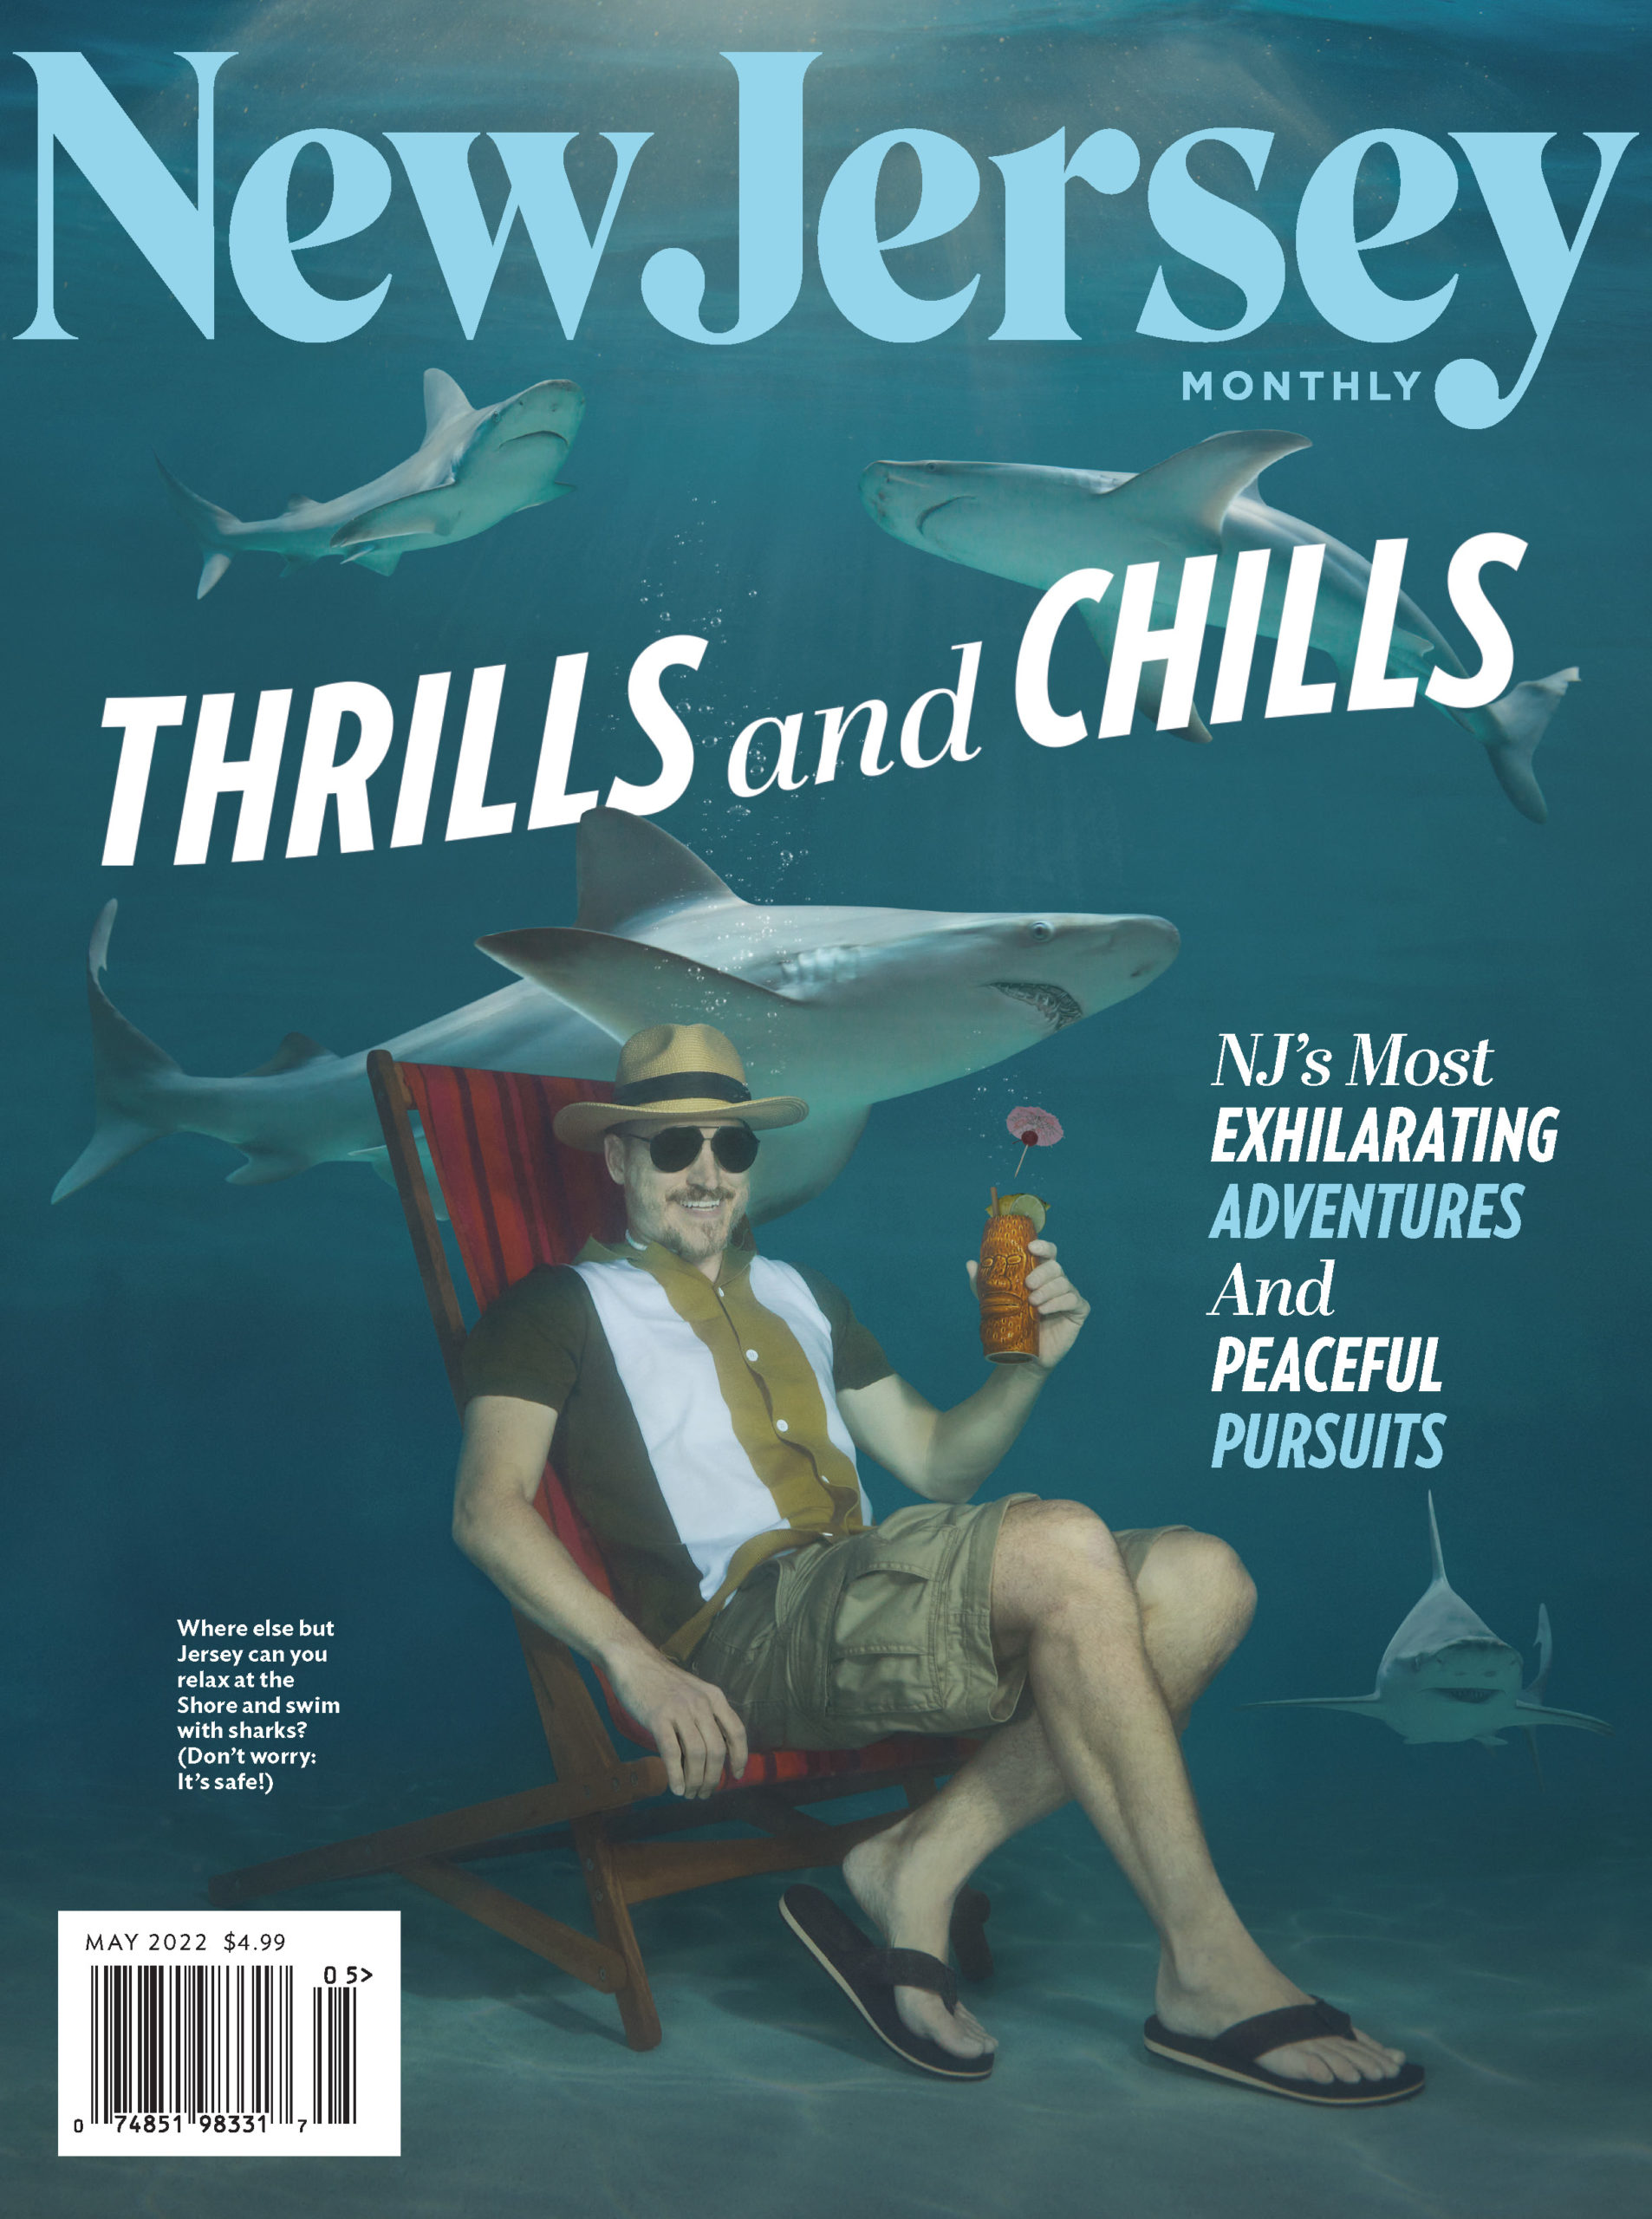 The cover of New Jersey Monthly's May 2022 issue.